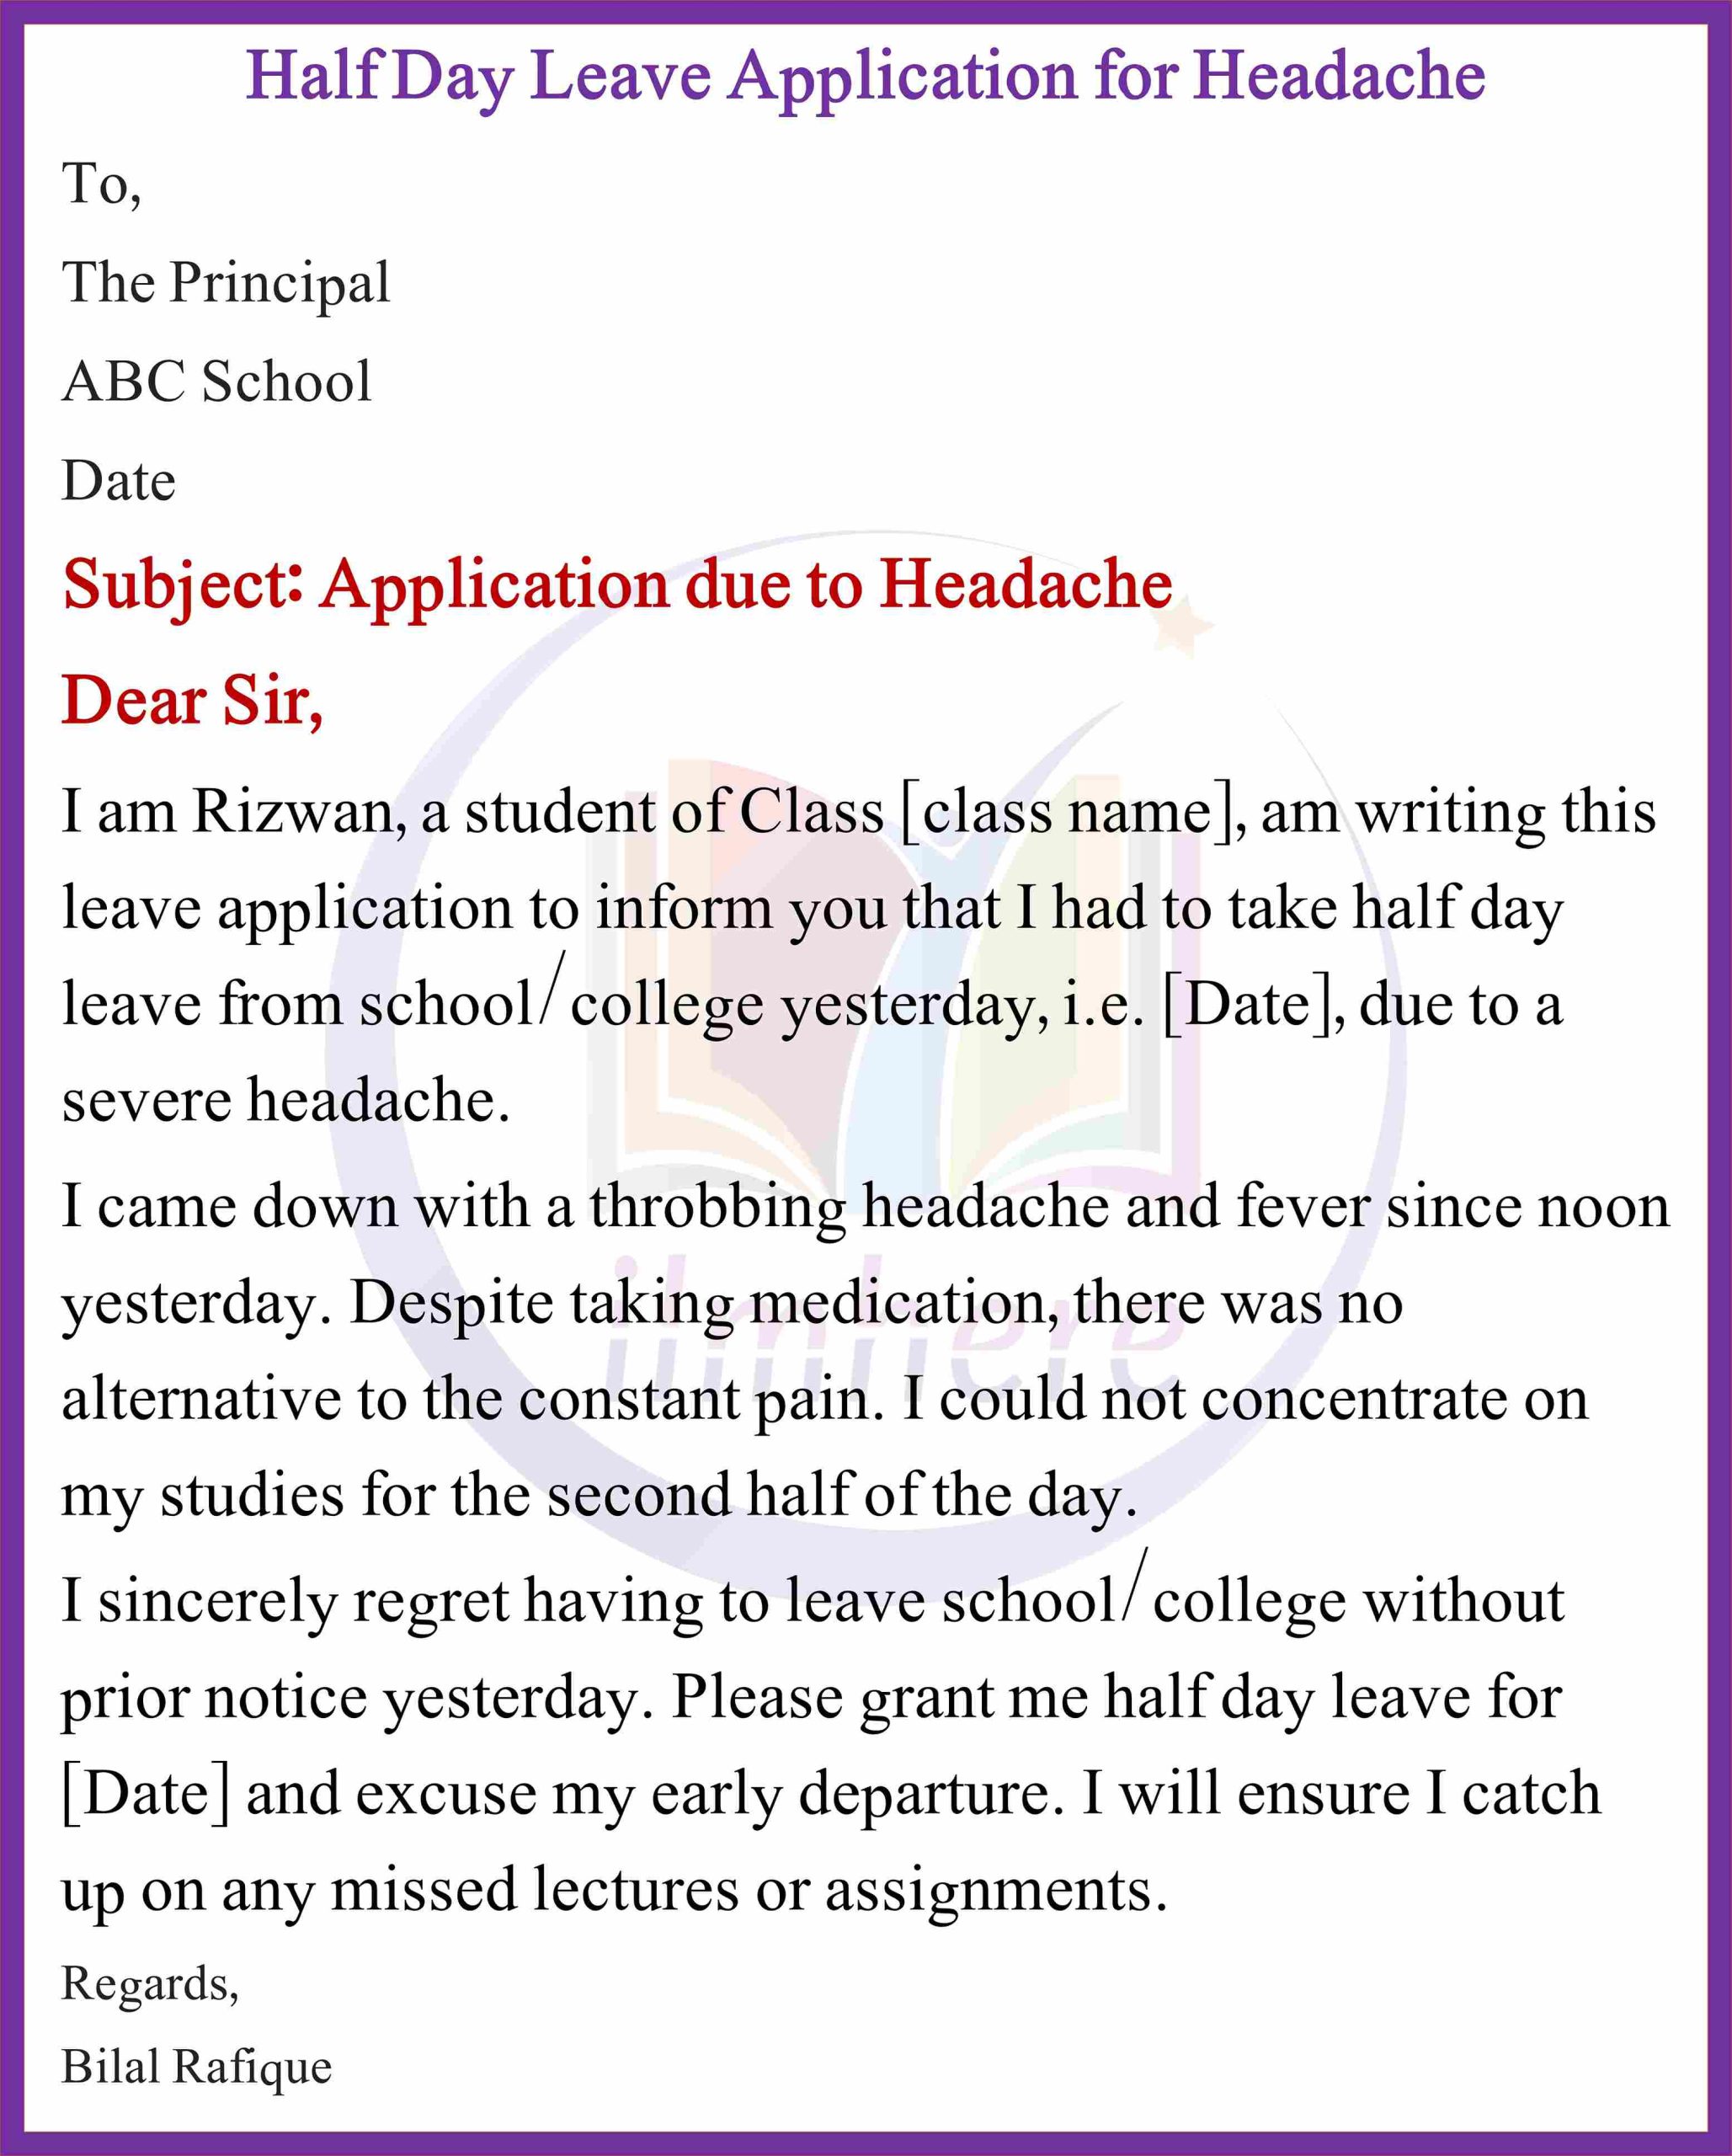 Half-Day Leave Application for Headache